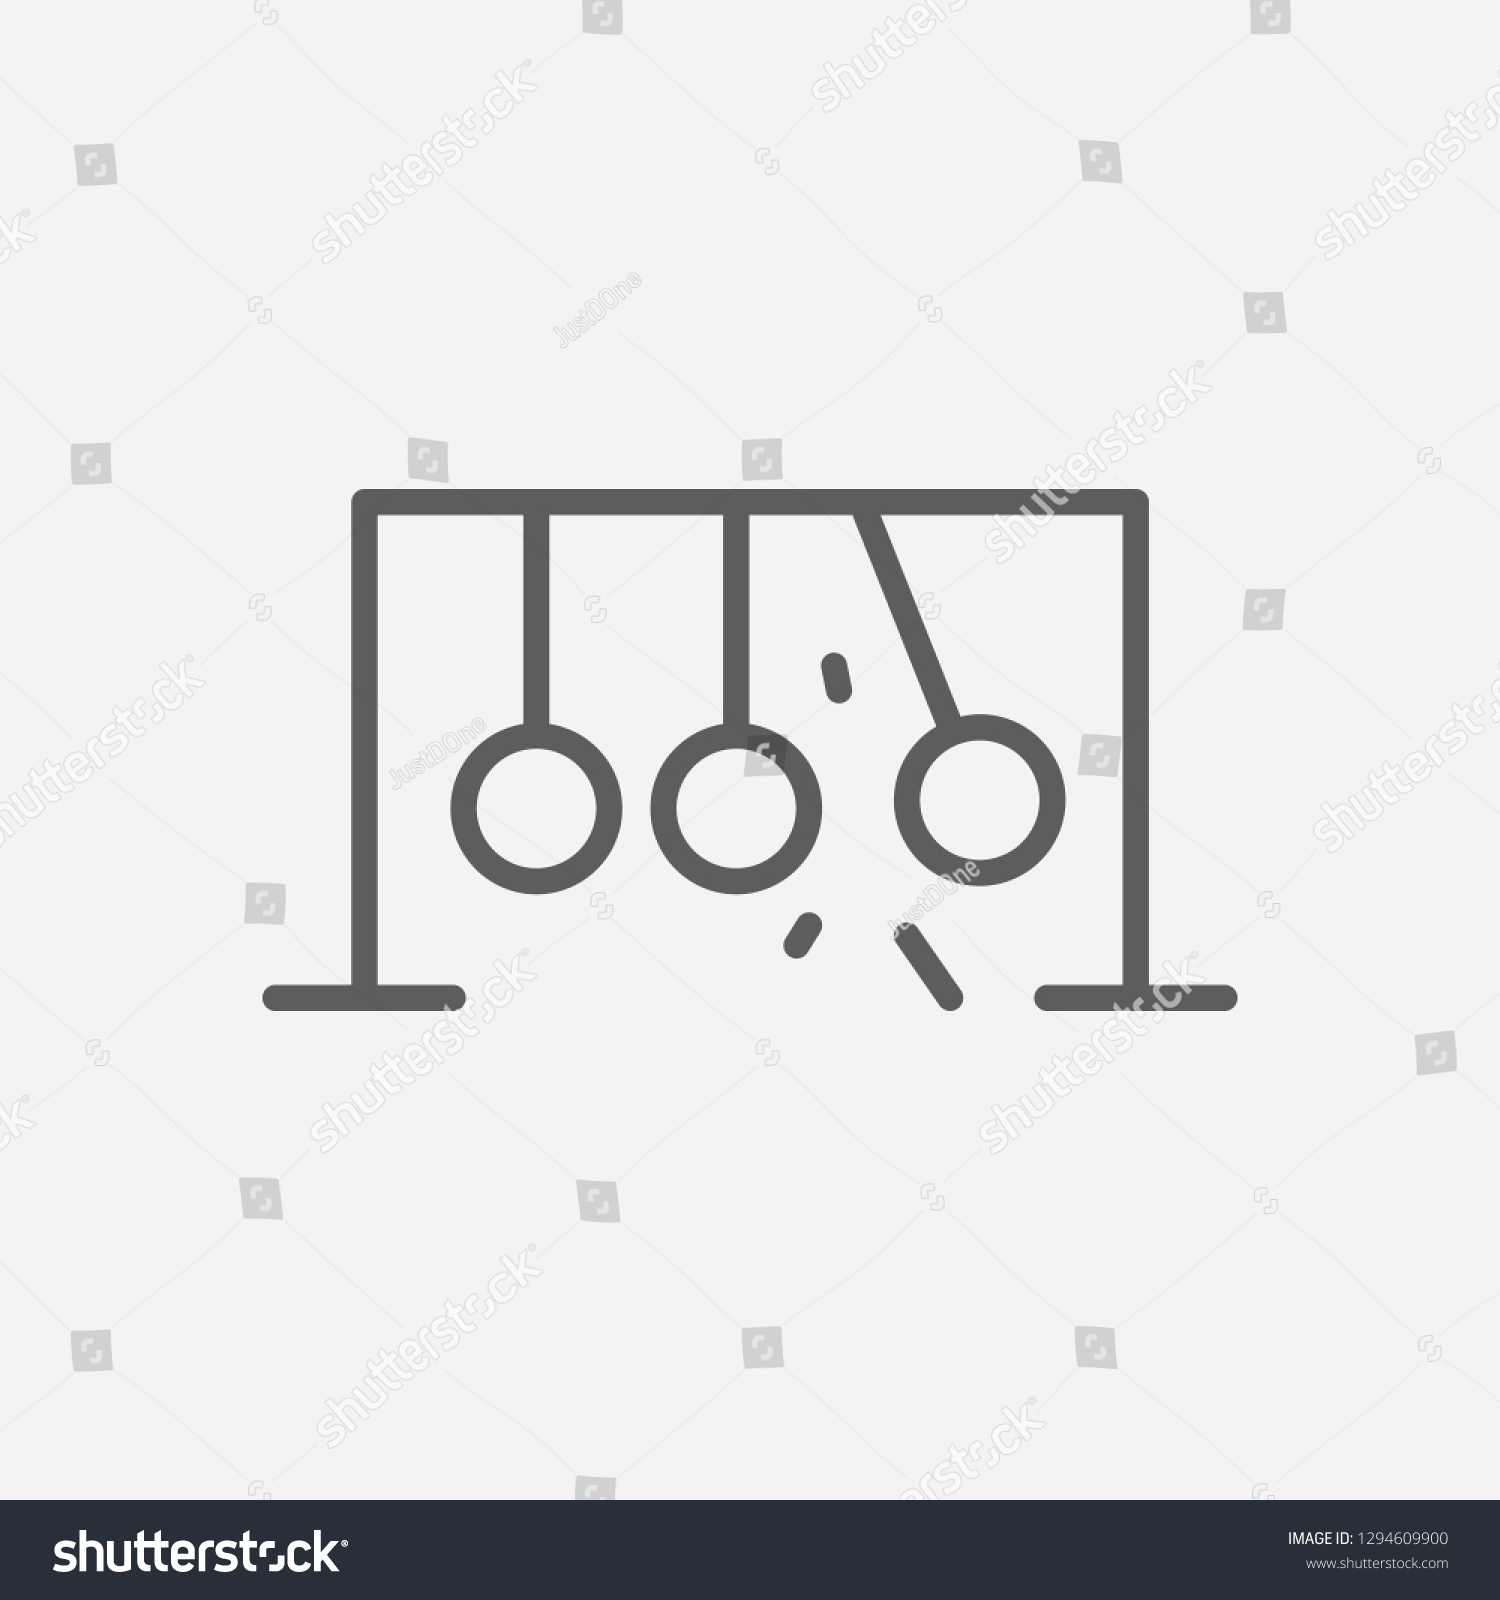 Newtons Cradle Icon Line Symbol Isolated Stock Vector Royalty Free 1294609900 0481